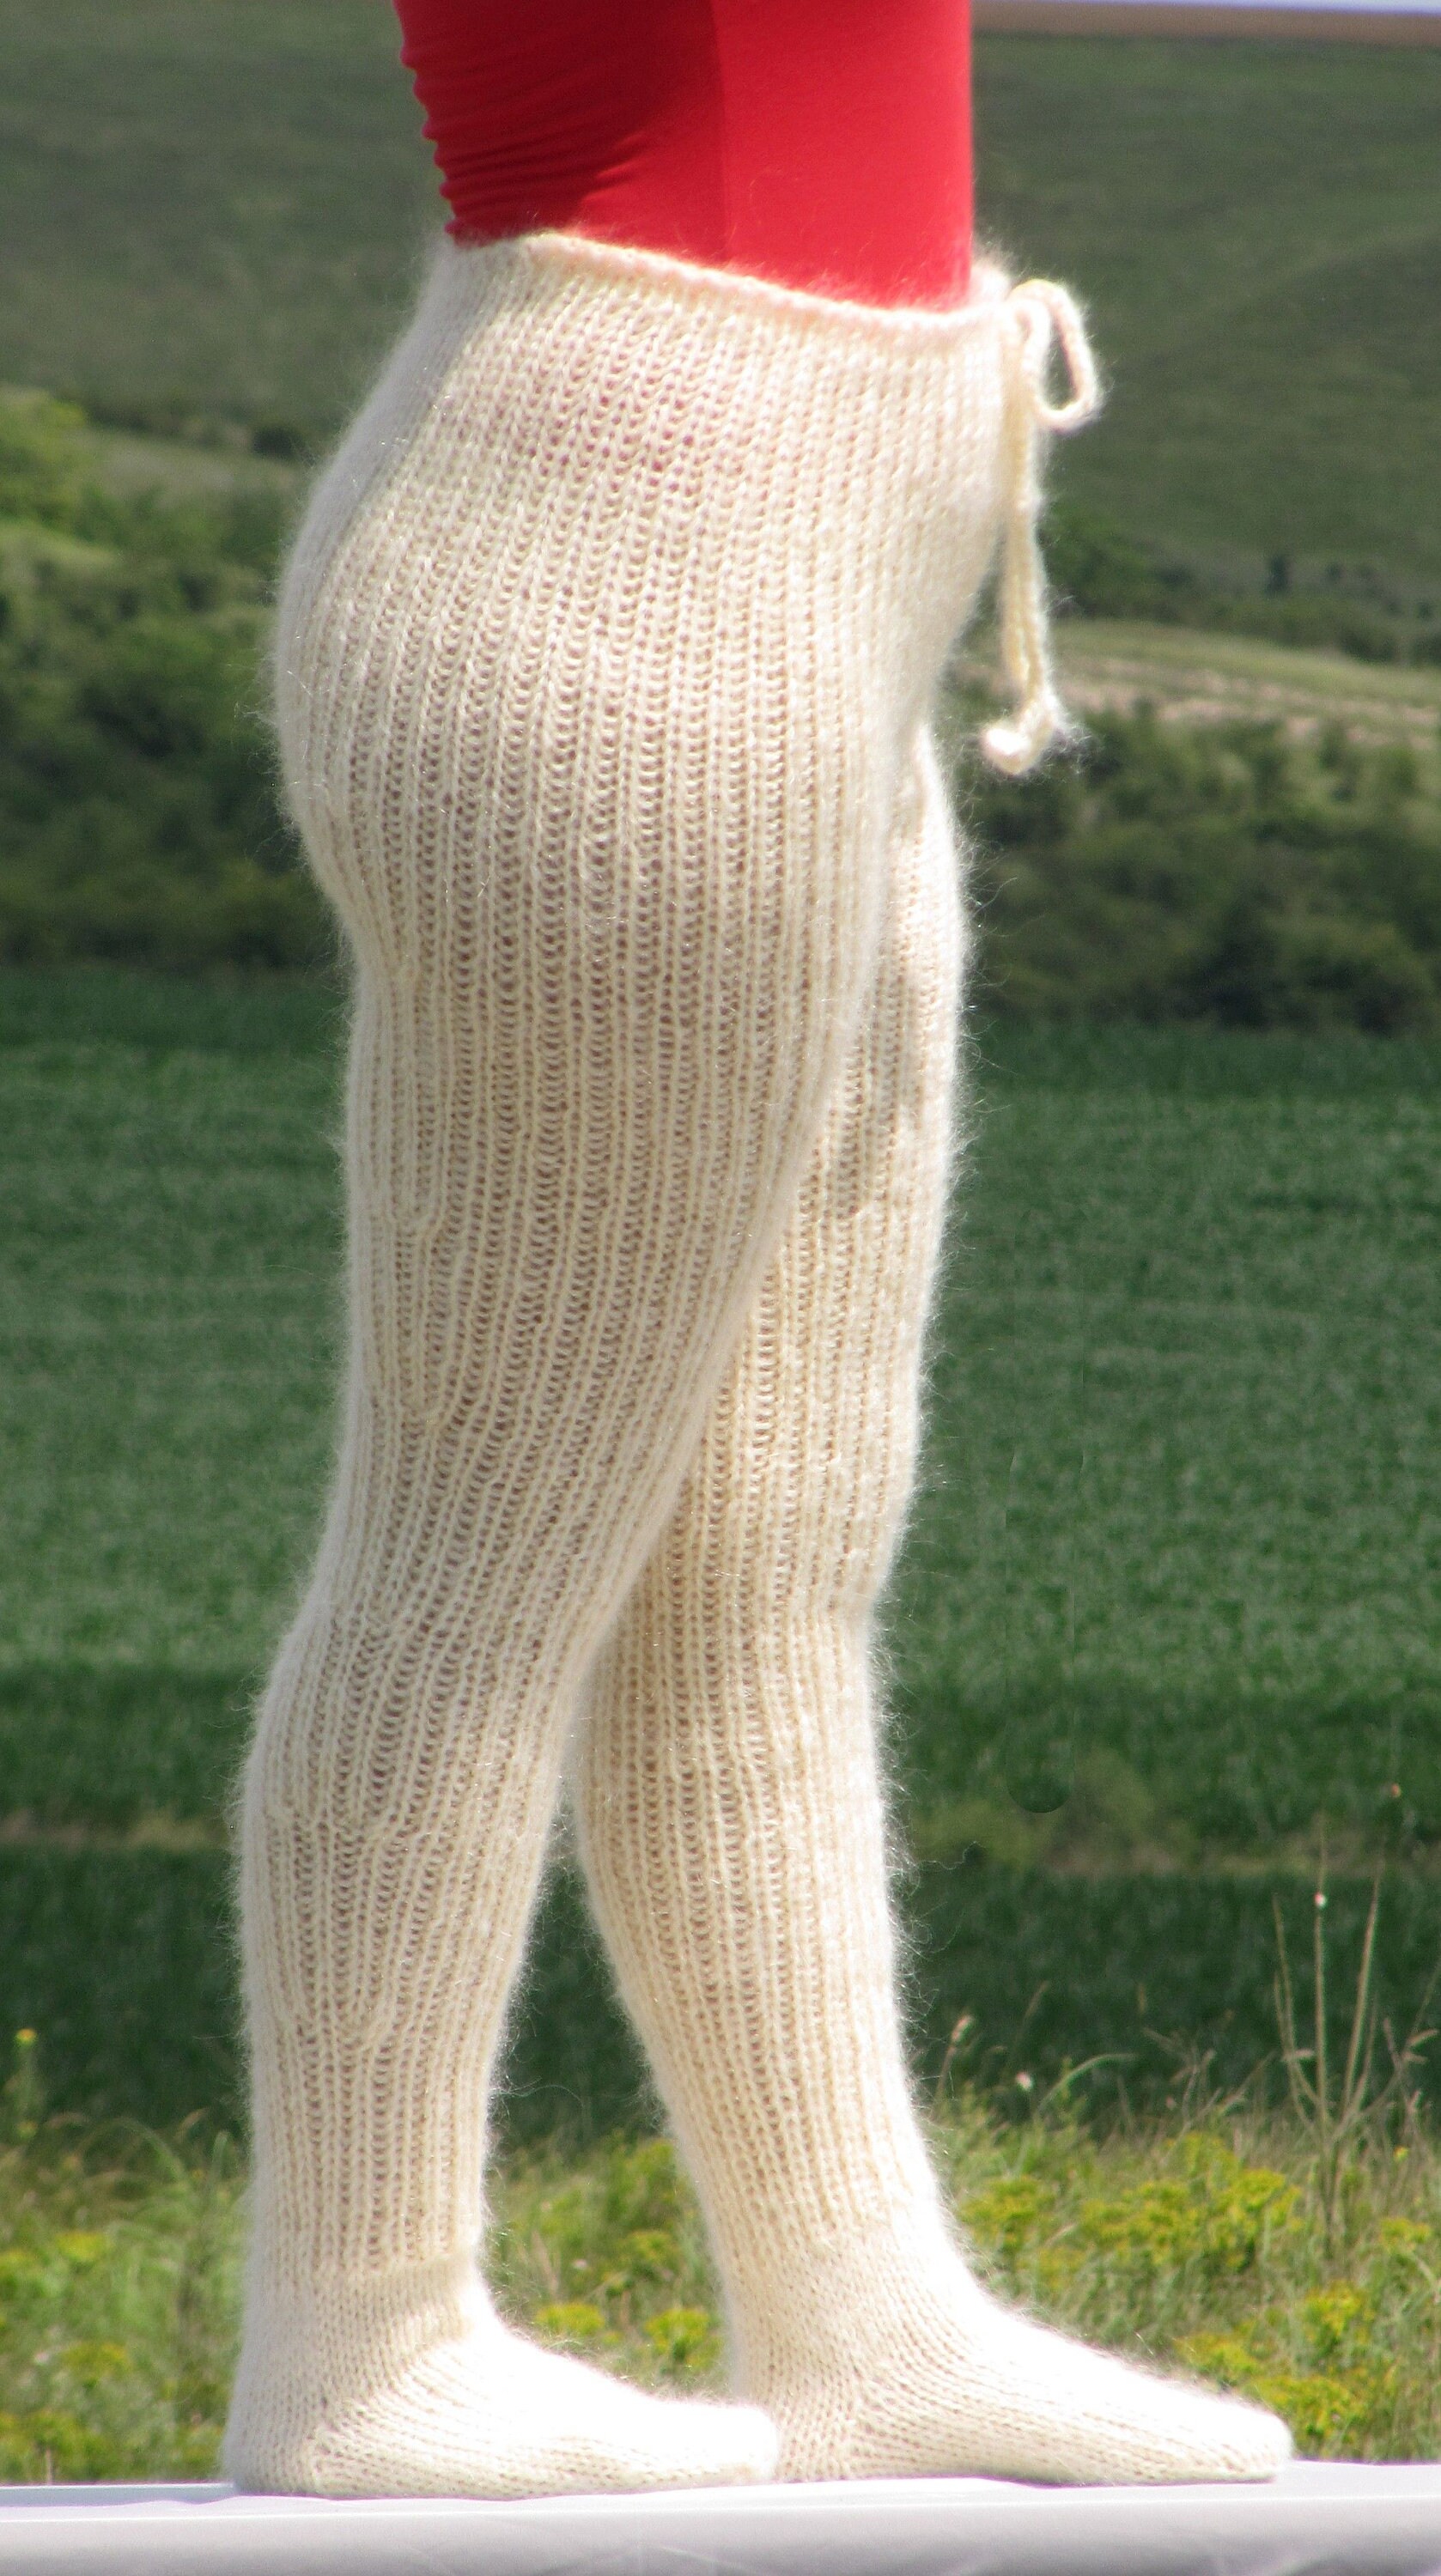 MOHAIR CREAM Pants With Socks Fuzzy Trousers With Socks - Etsy